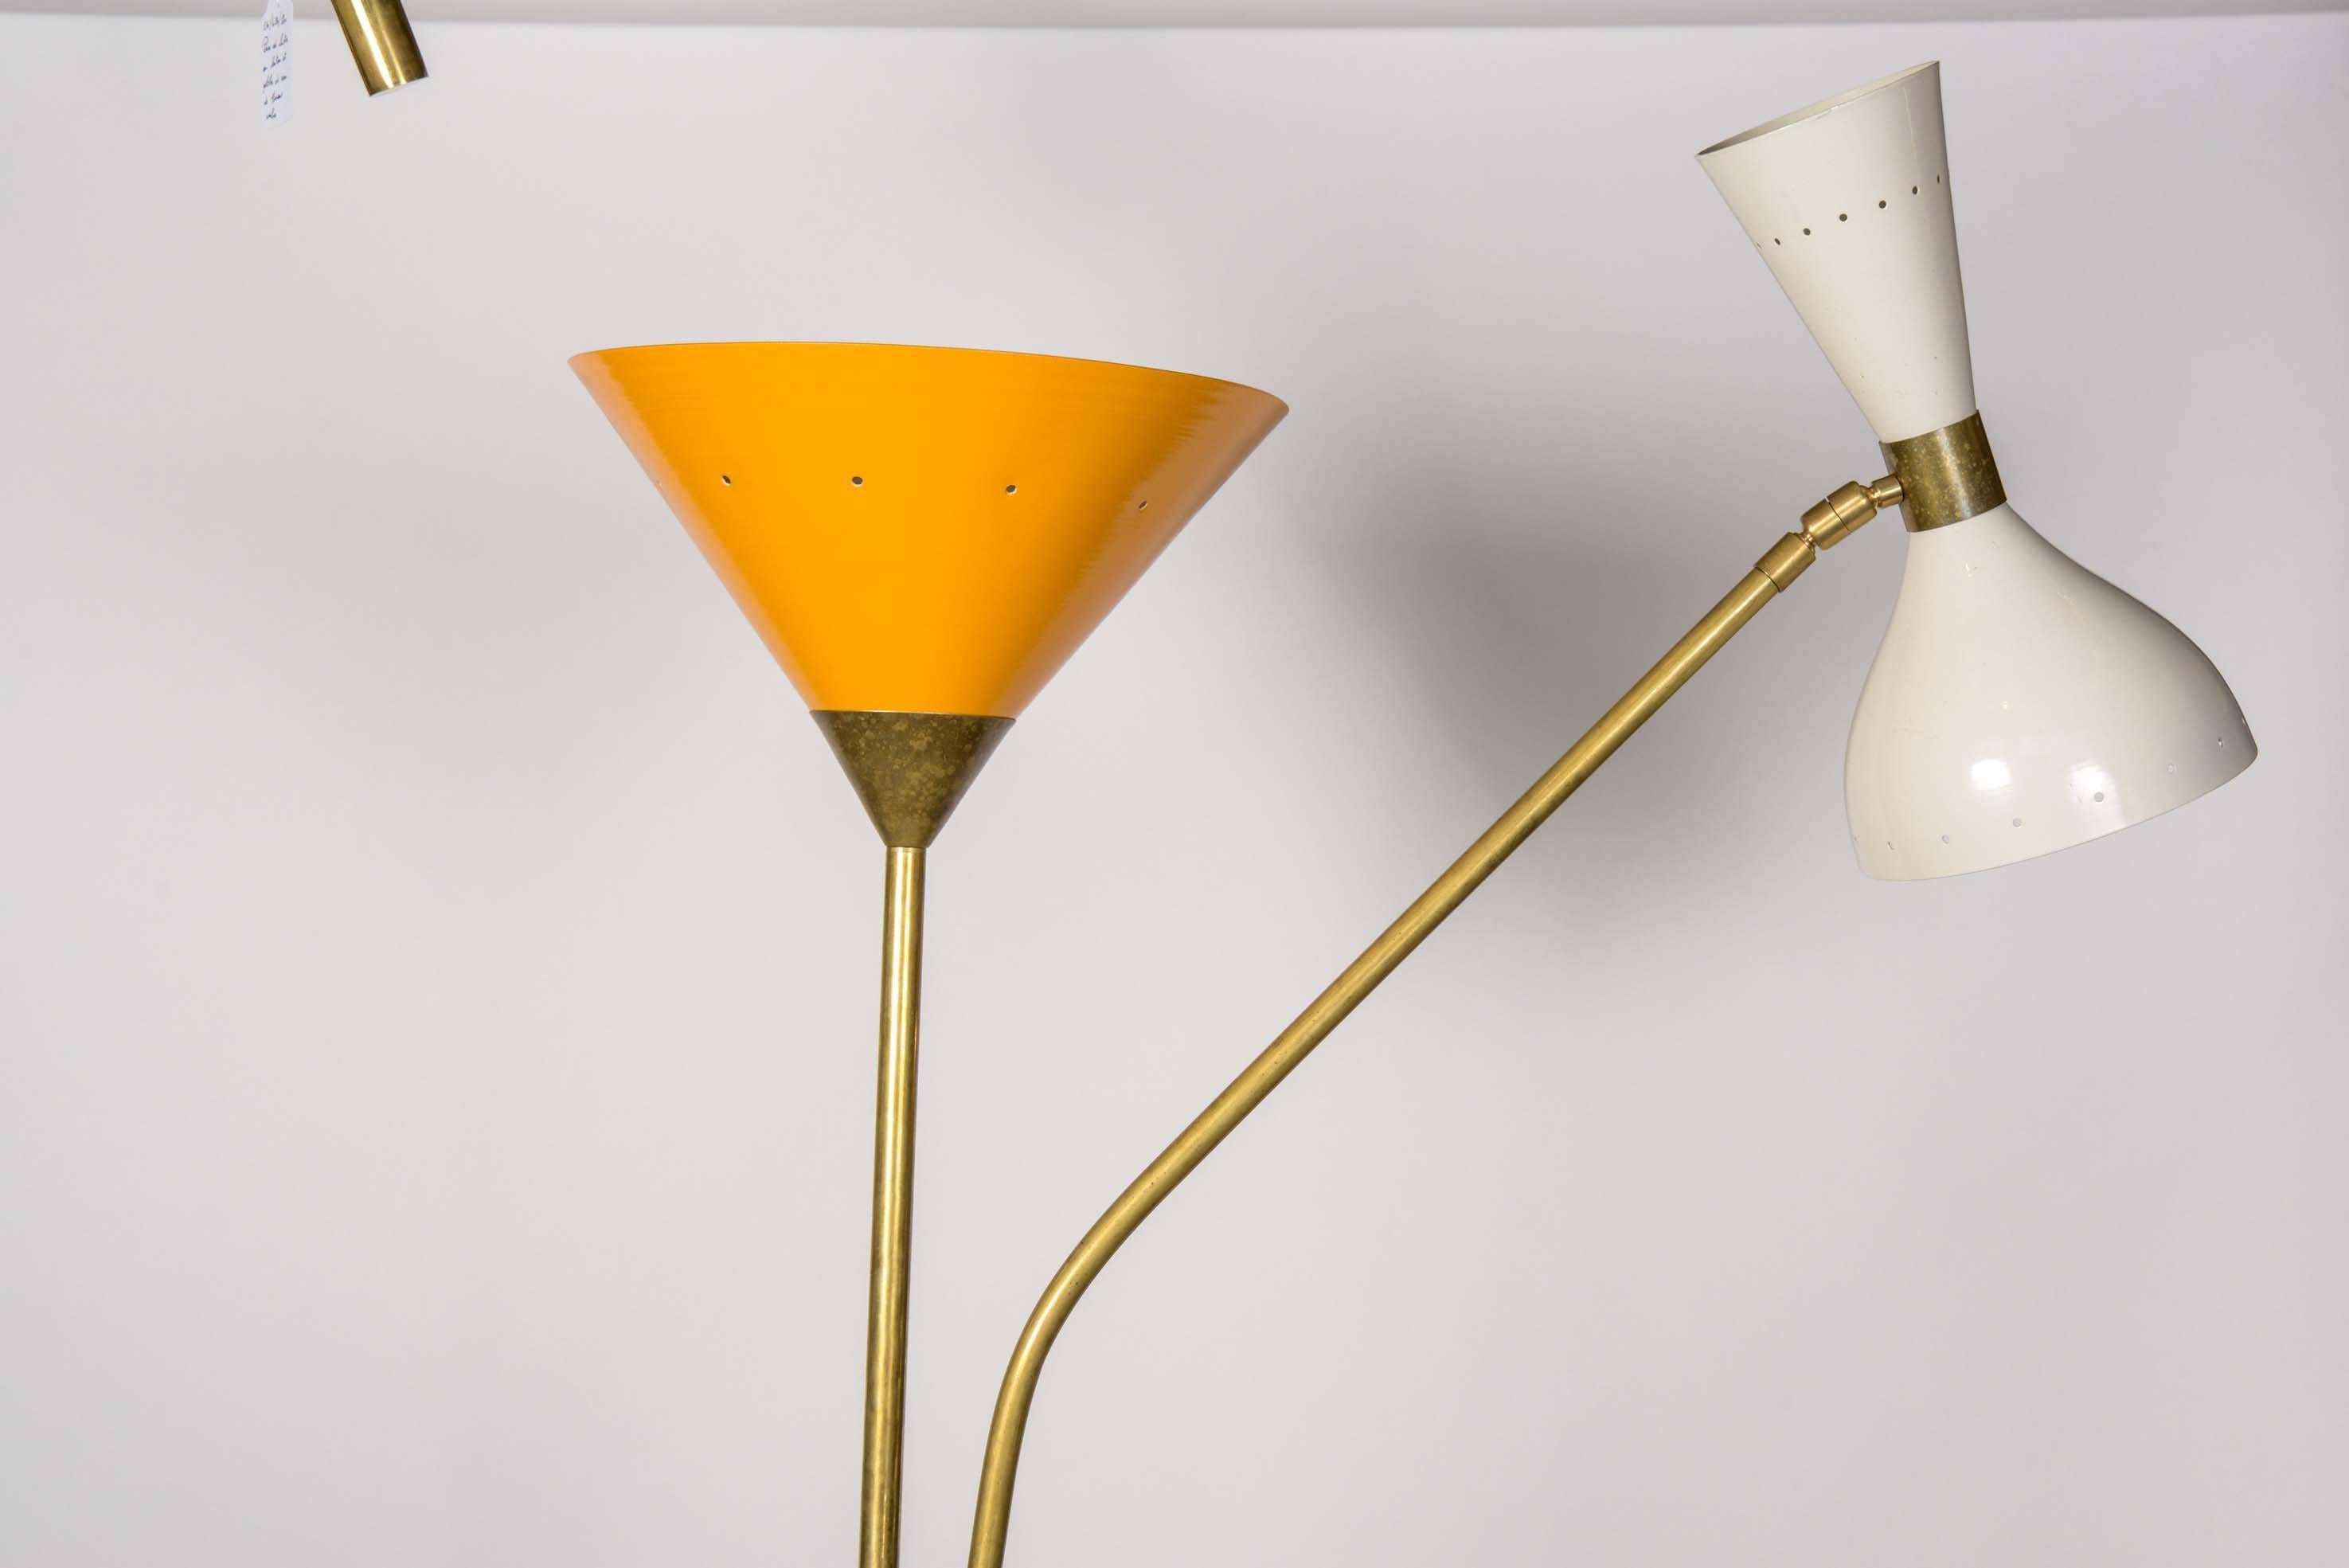 Floor lamp made of a white marble foot, two long brass arms, one ended by a yellow cone and the other one by the typical two sides sconce popularized by Stilnovo in a white colorway.

While the arm with the yellow cone remain vertically still, the